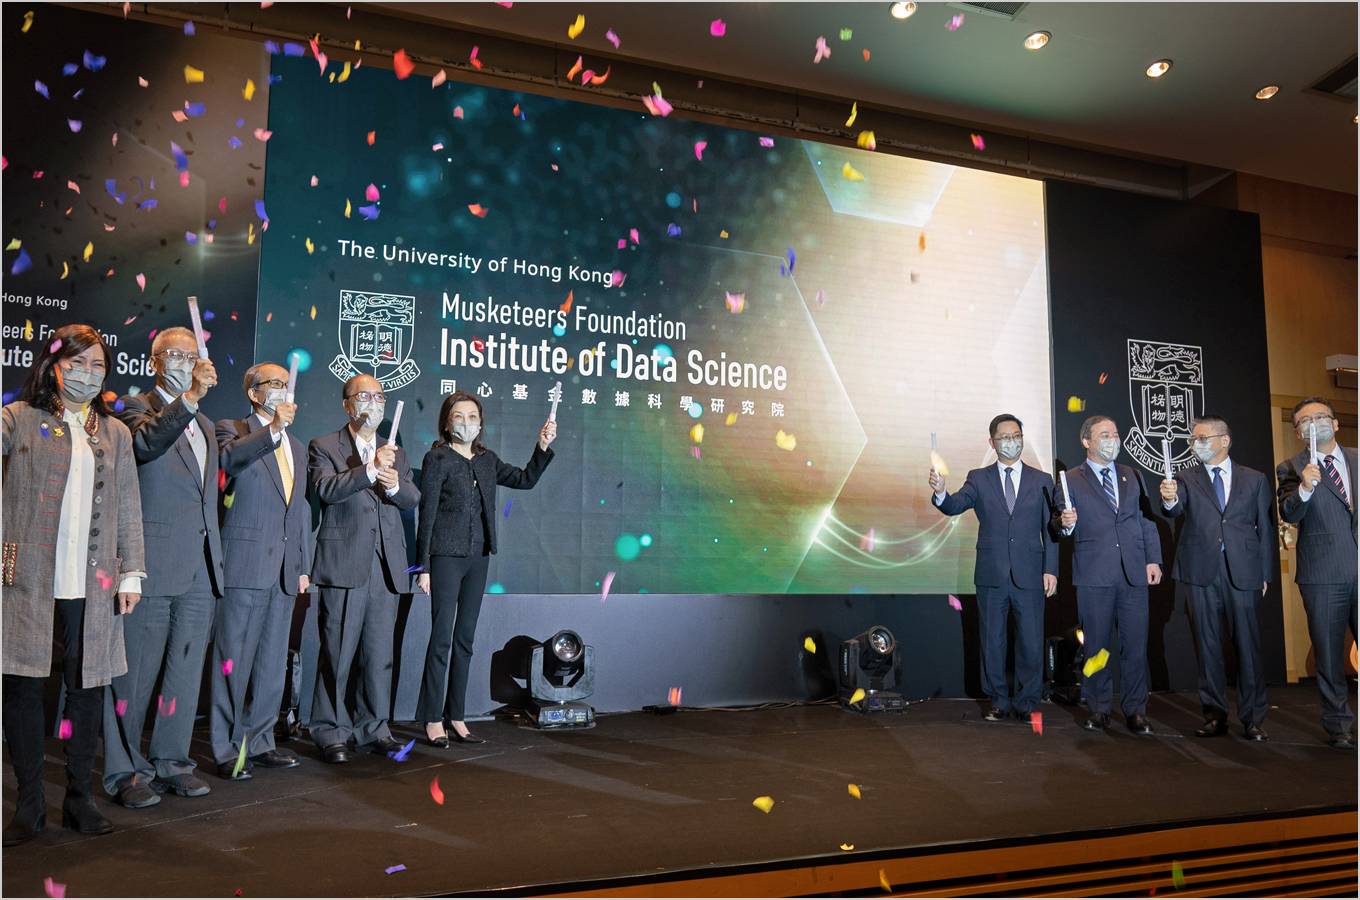 eConnect: HKU Musketeers Foundation Institute of Data Science | The Road to Reopening Hong Kong | Dentistry x RTHK 精靈一點 | 2022 AsiaGlobal Fellows | 香港再工業化的微觀分析